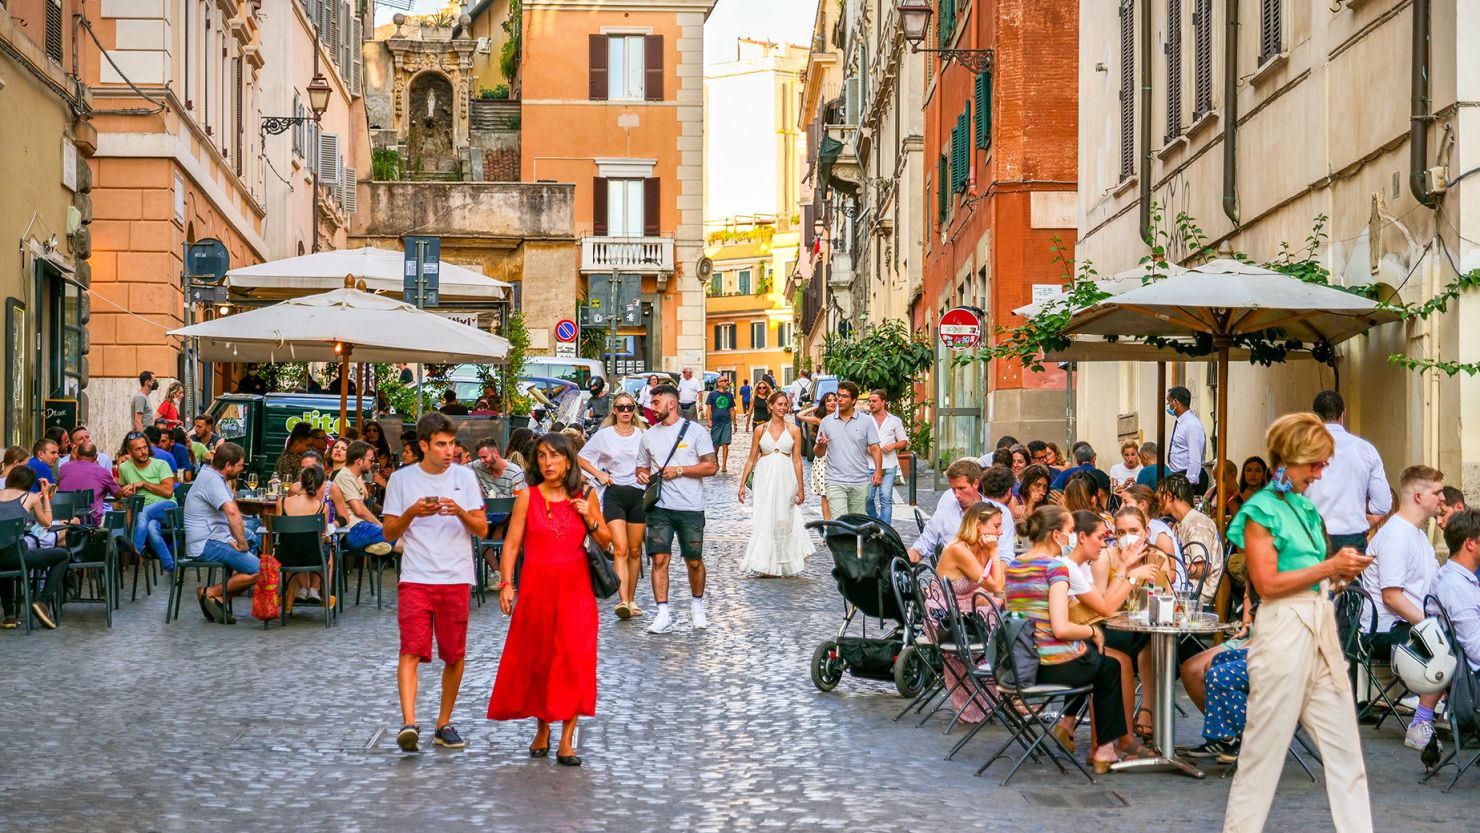 Could this be where you spend your time after a hard day's work as a digital nomad? Dozens of customers enjoy some outdoor dining and drinking at Piazza della Madonna dei Monti in Rome.